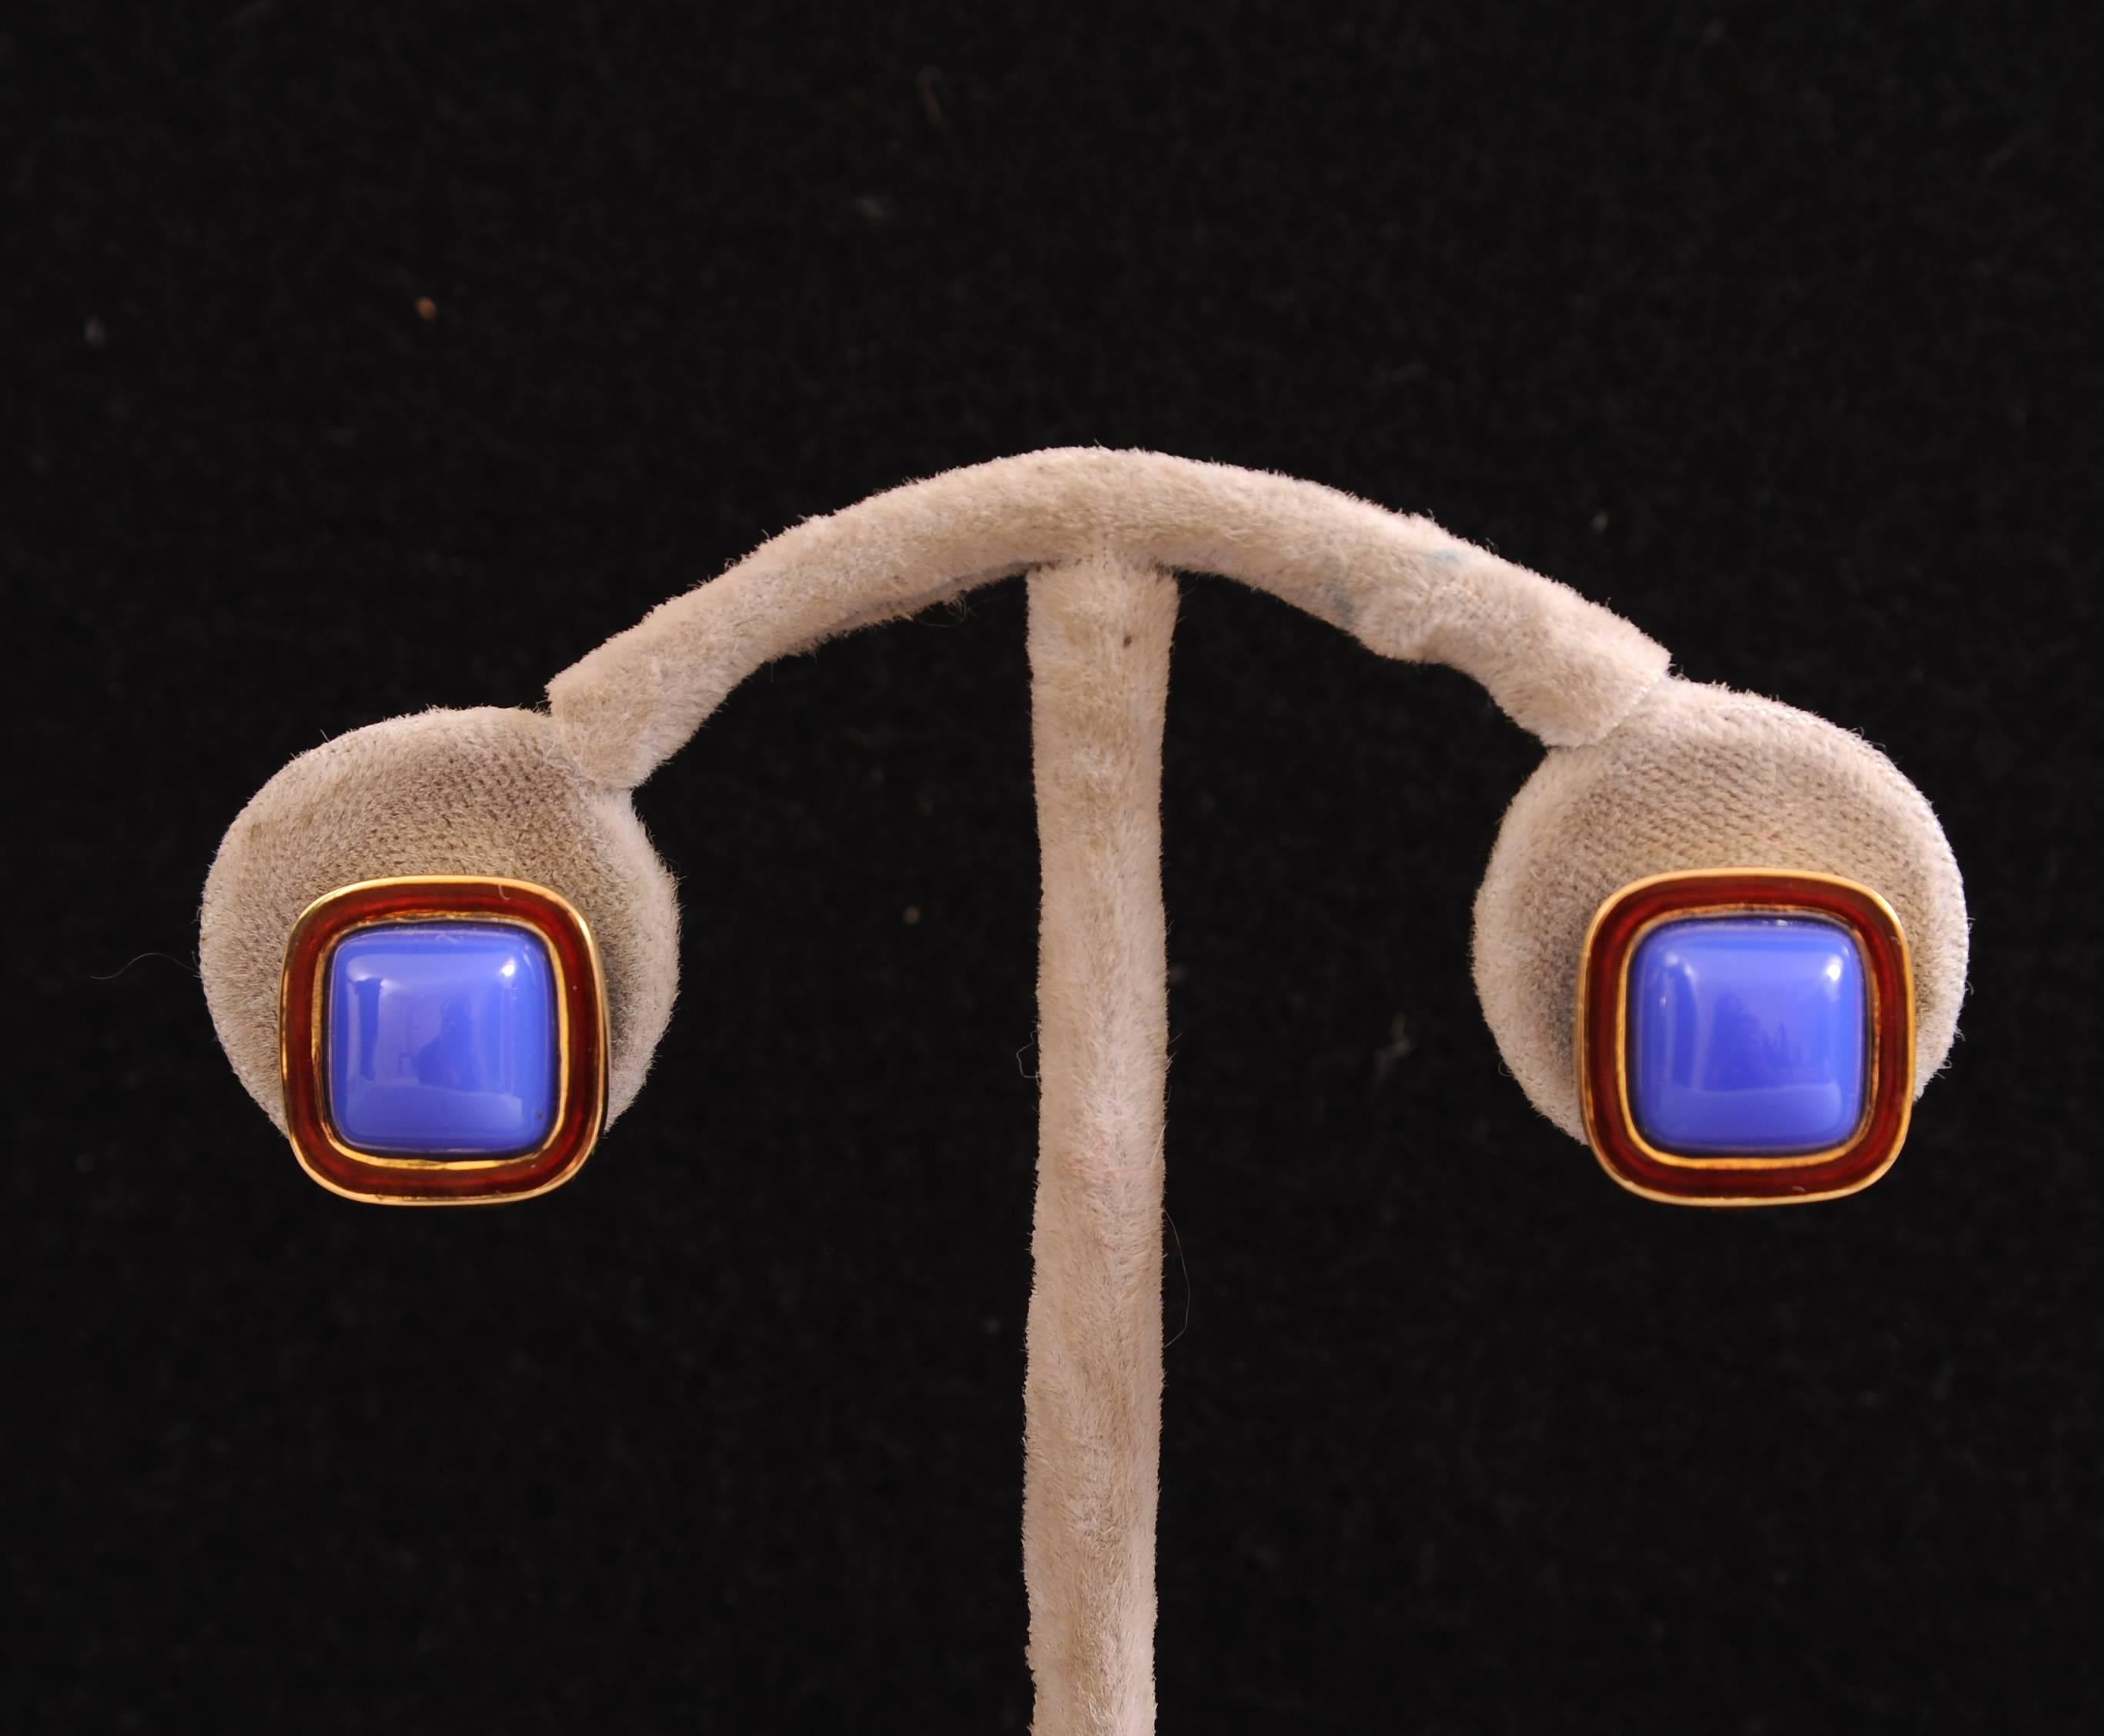 These stunning earrings from Andrew Clunn can be worn in two different ways. The 18 karat gold, red enamel and chalcedony earrings can be worn alone or with the addition of the blue lace agate drops. They are signed Andrew Clunn and 18K and they